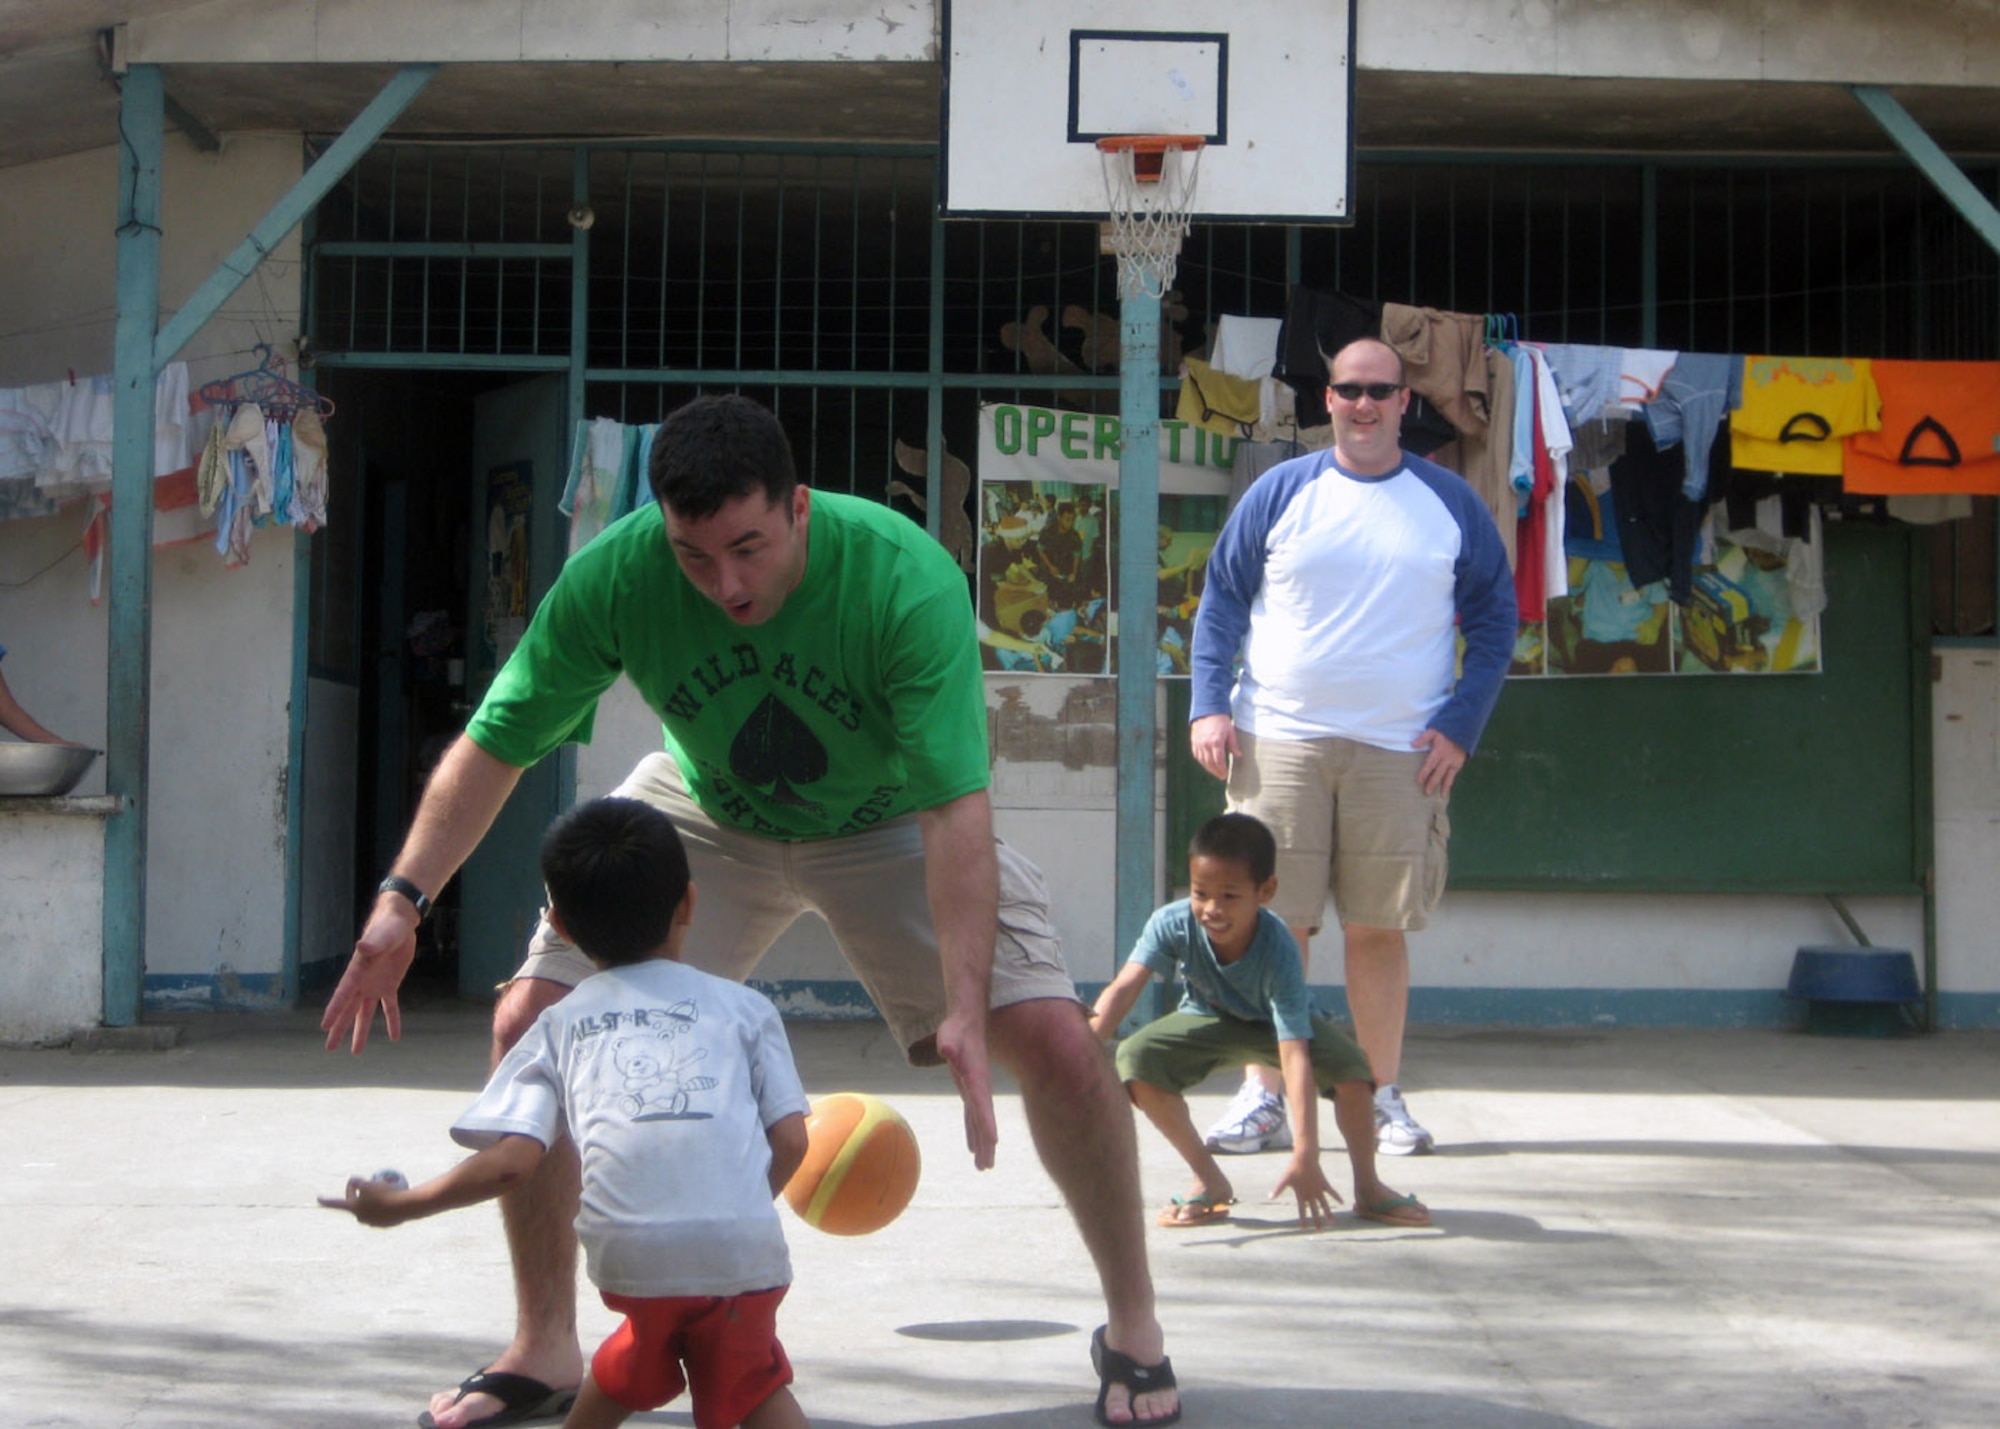 Capt. Zak Blom and Capt. Matt Halladay play basketball with children Jan. 19 at the Duyan ni Maria orphanage in Angeles City, Pampanga in the Philippines. Members of the 17th Special Operations Squadron, 353rd Operations Support Squadron and 25th Intelligence Squadron Det. 3 stopped by the orphanage and single mothers home with boxes of clothing, shoes, toys, books and school supplies. Captain Blom is a 17th SOS pilot, and Captain Halladay is a 17th SOS navigator. (Courtesy photo) 
